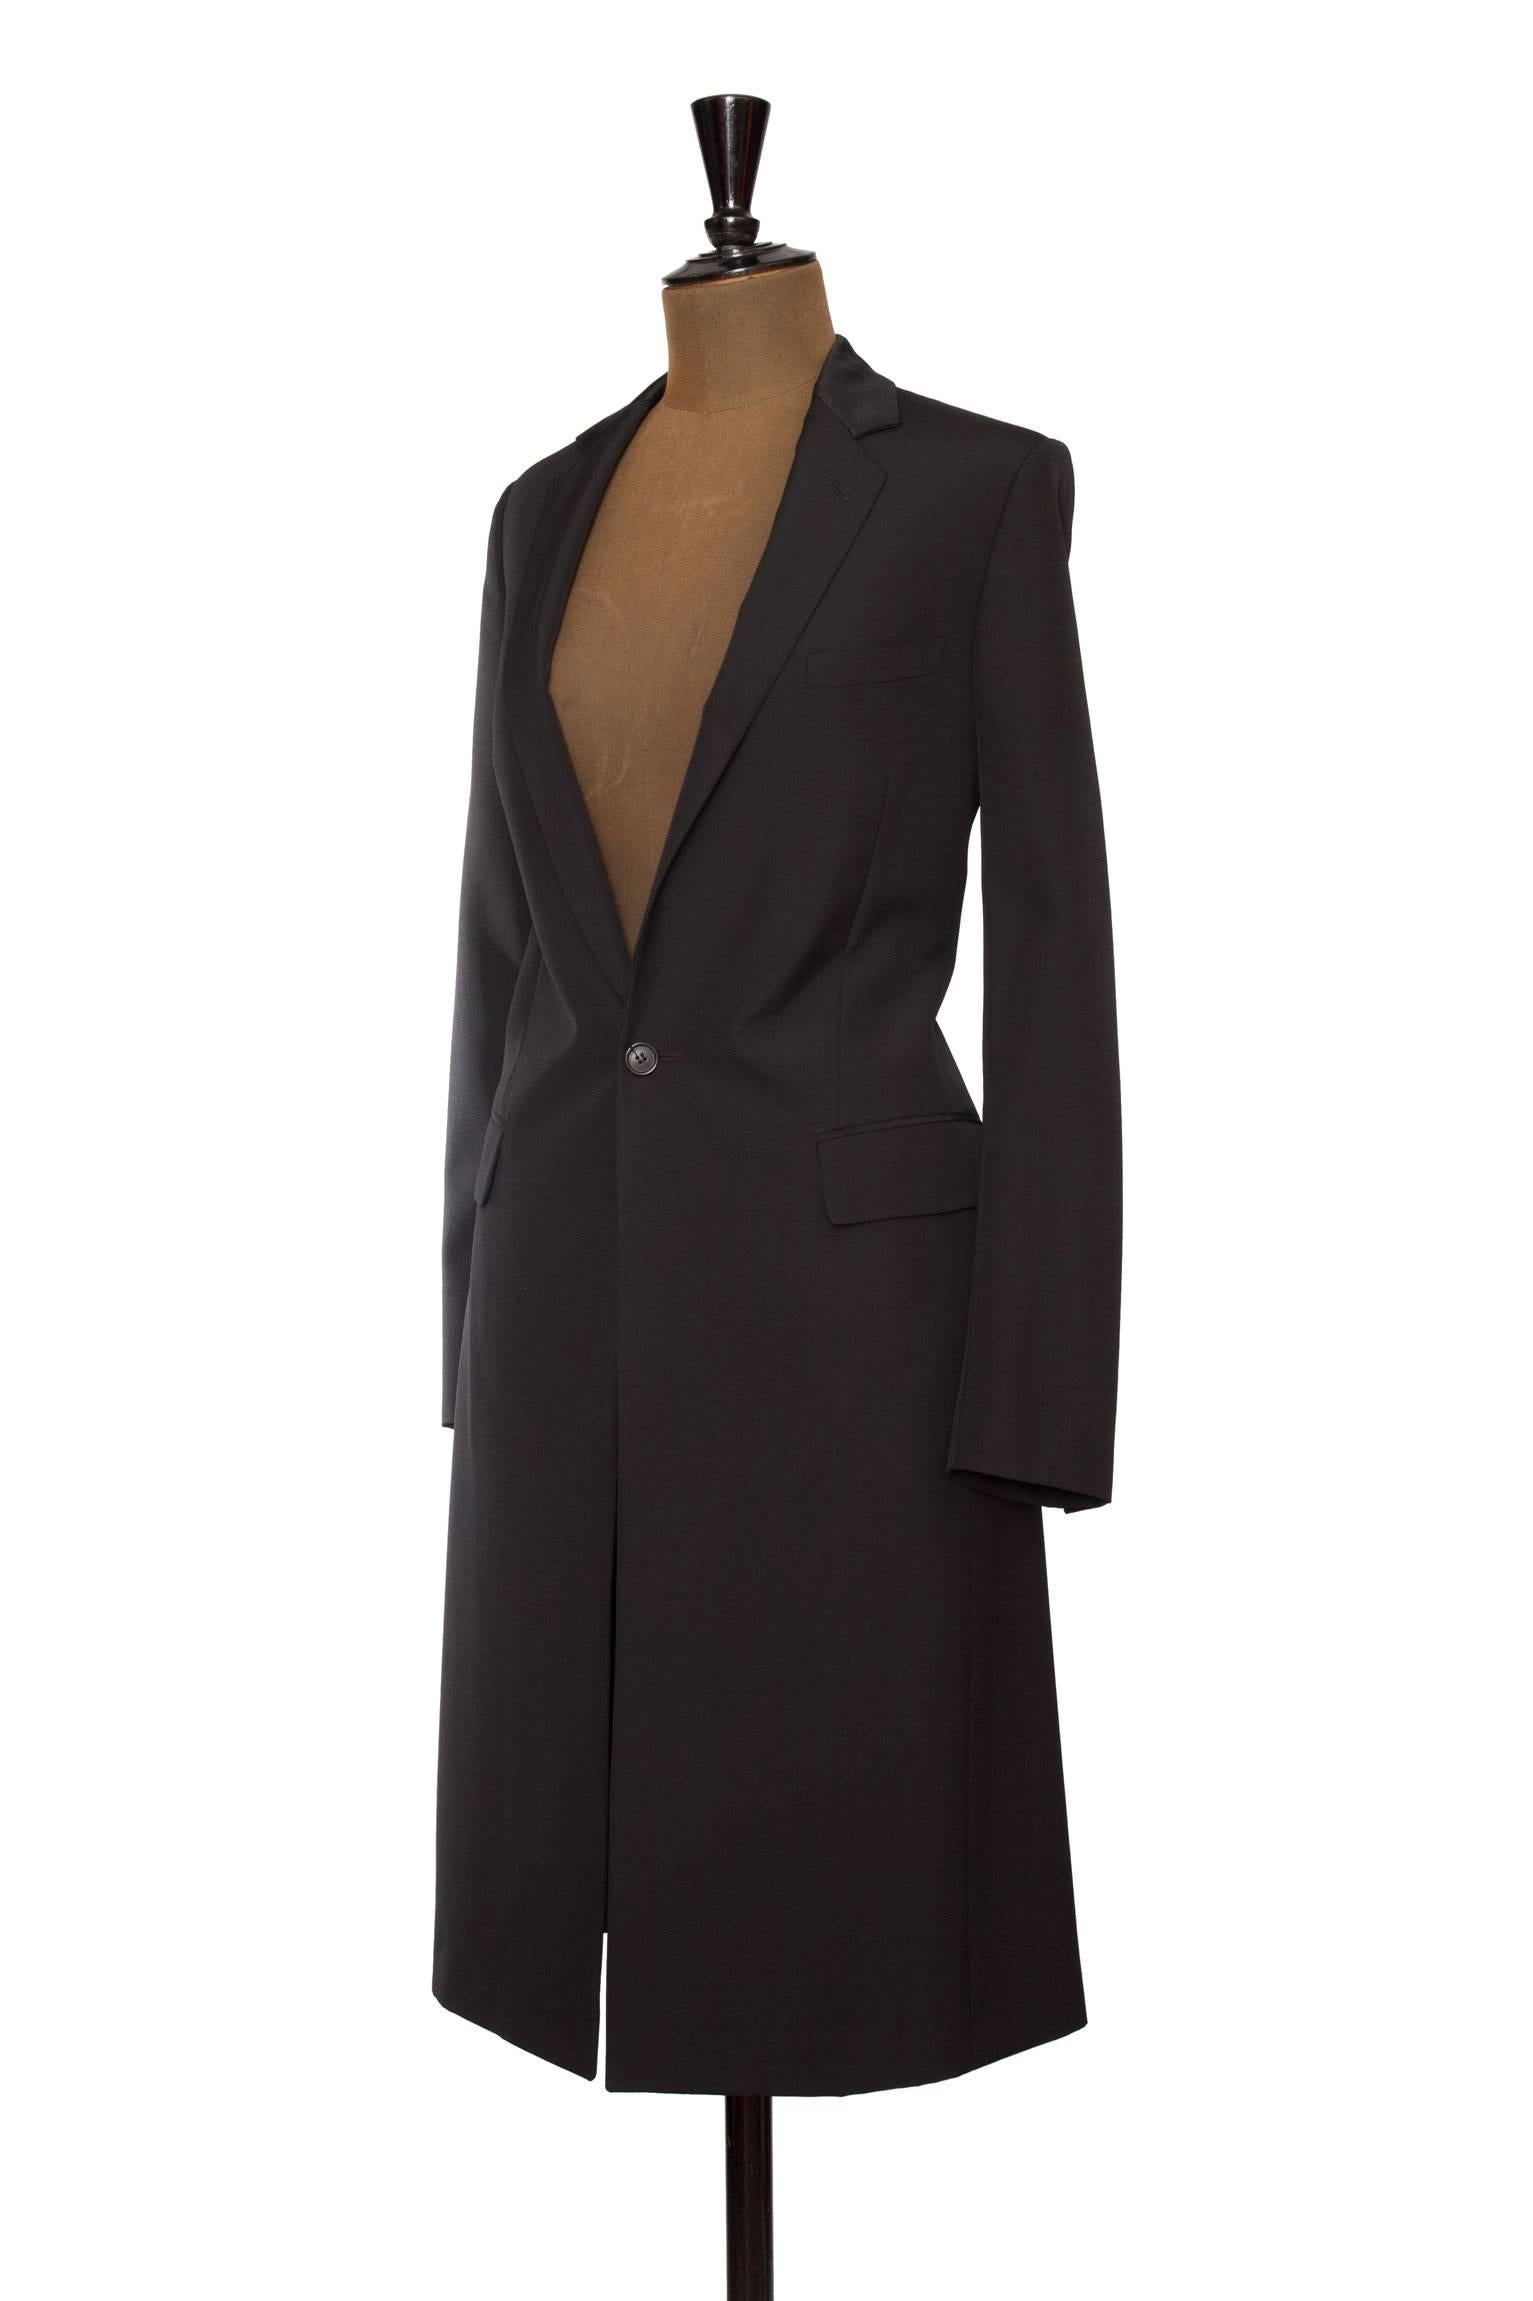 A tailored 90s black Christian Dior jacket with a flap welt pocket situated on each side of the hip, slim lapels and a single front button closure pinch in the waistline in the centre front. The coat is fully lined and has structured shoulders.